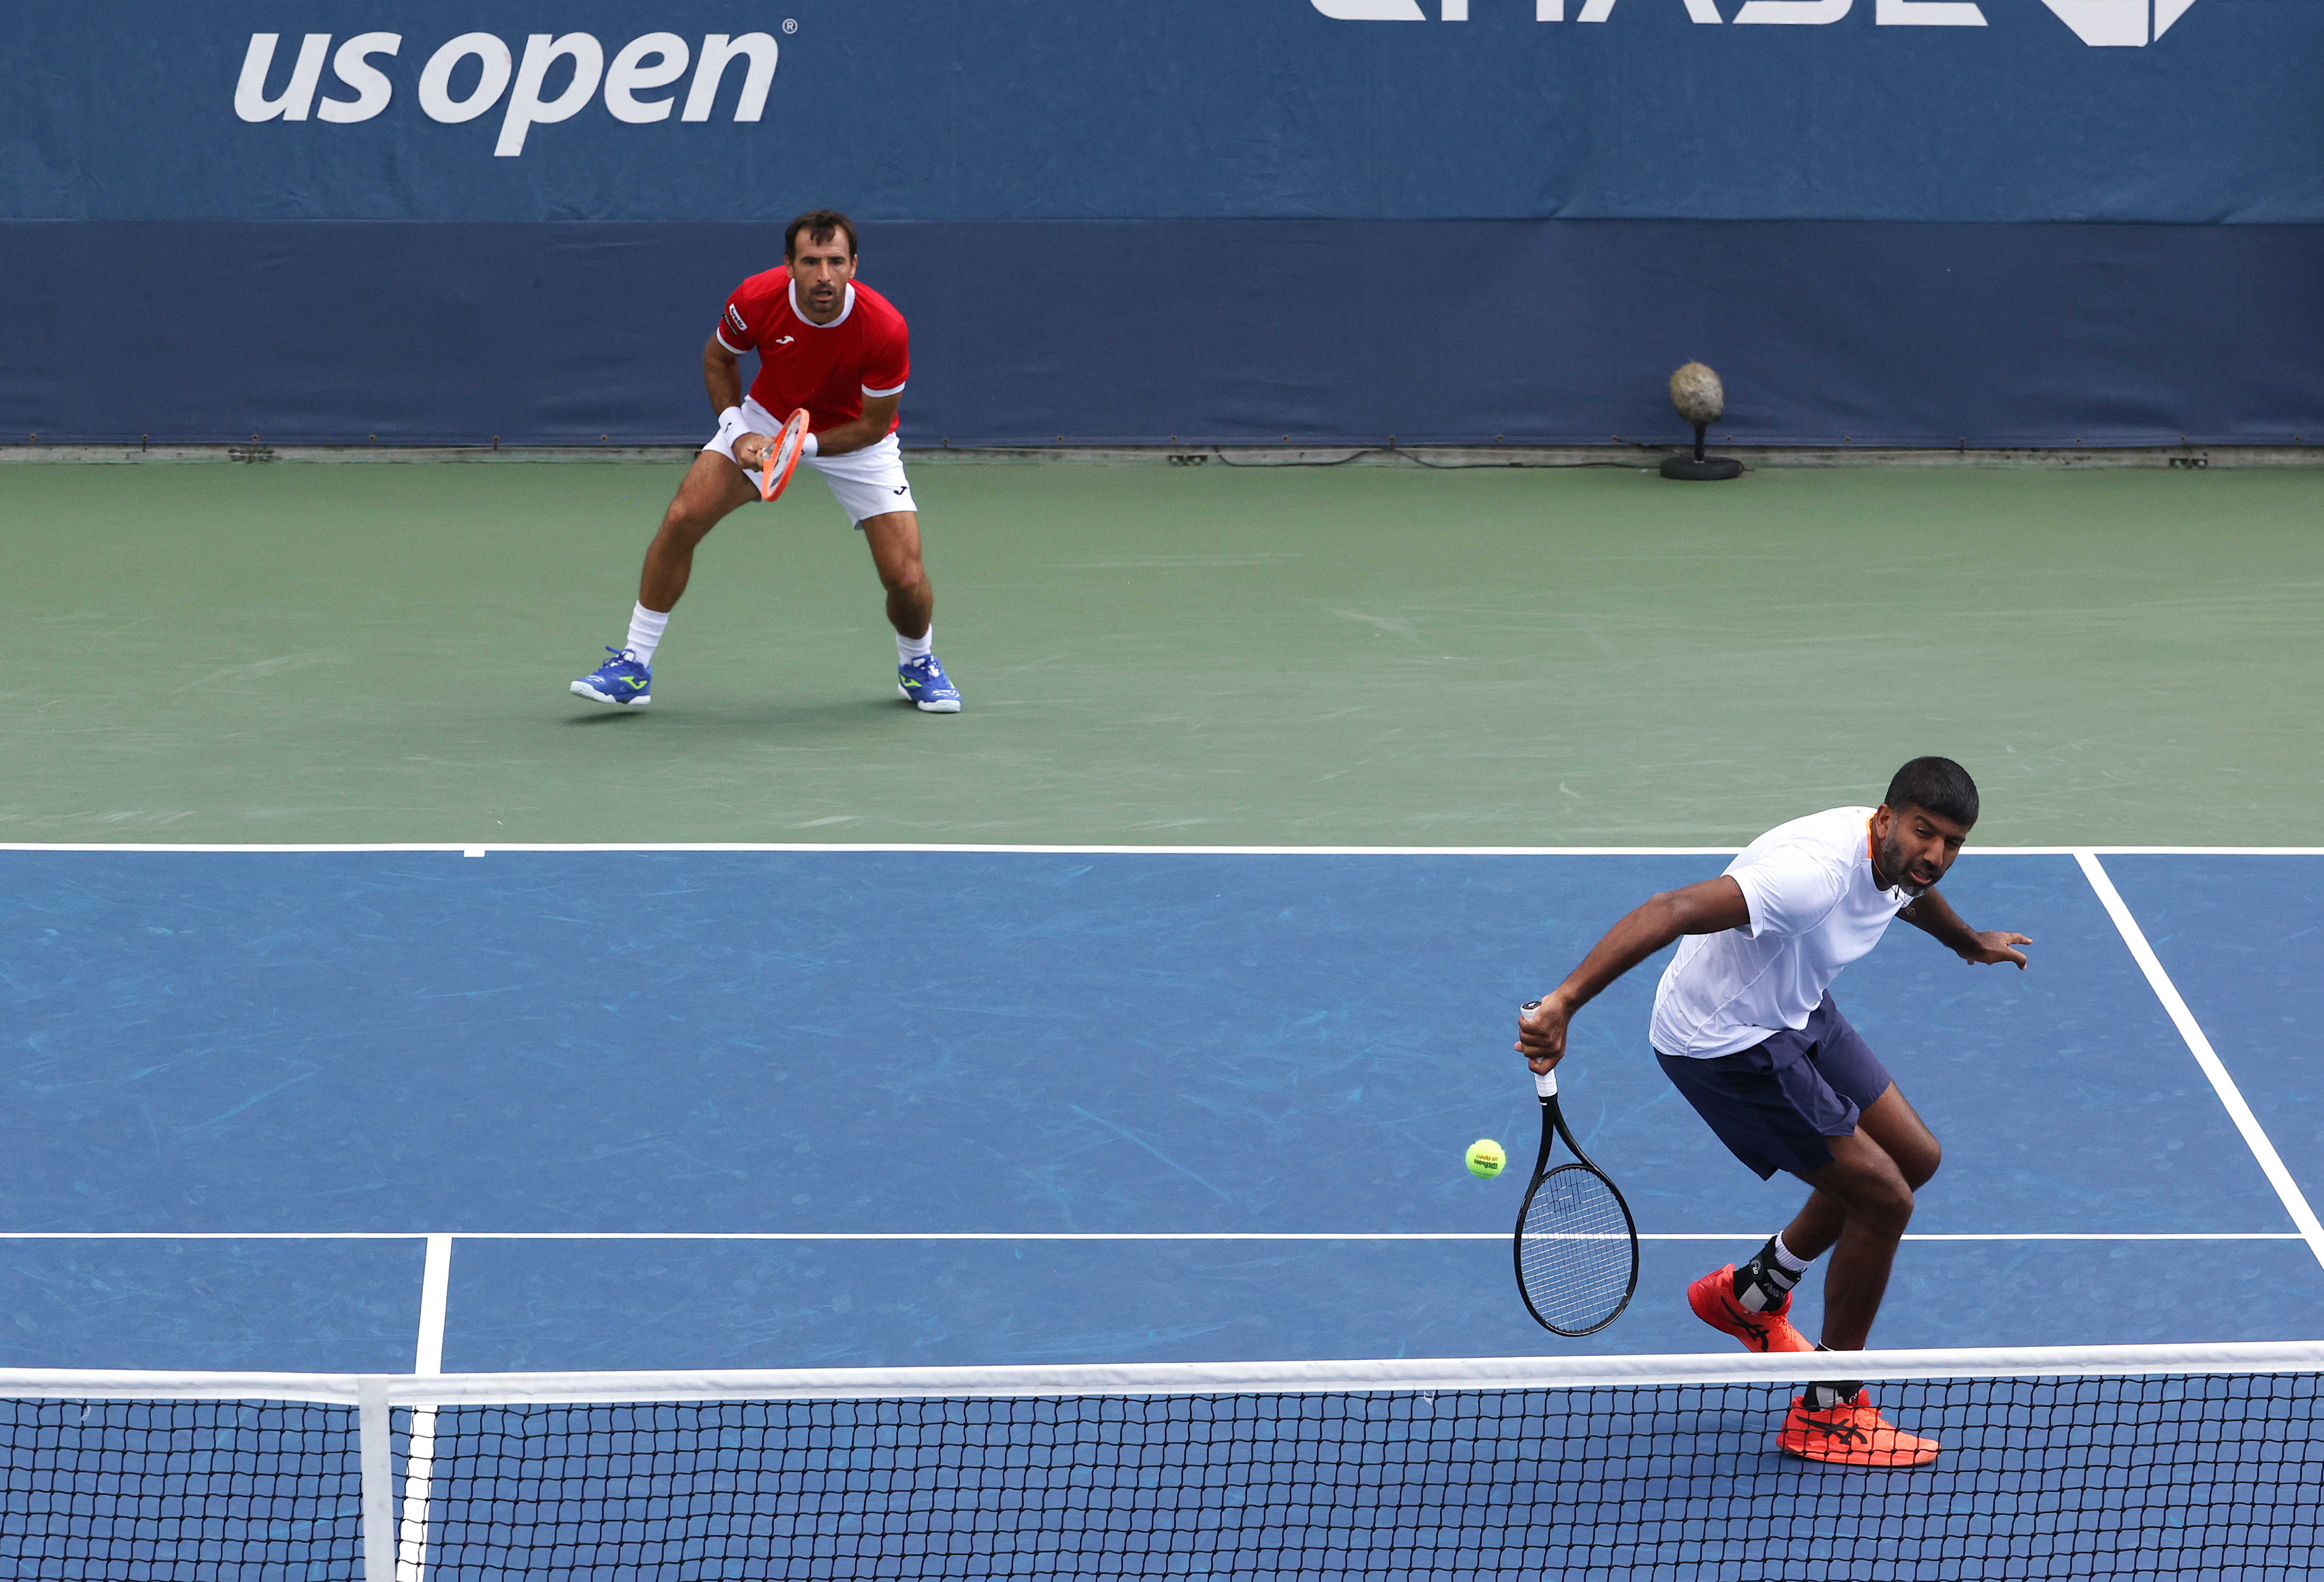 “I think in the tiebreak we were definitely far better and we played some fantastic points” – Rohan Bopanna on his R1 win at US Open